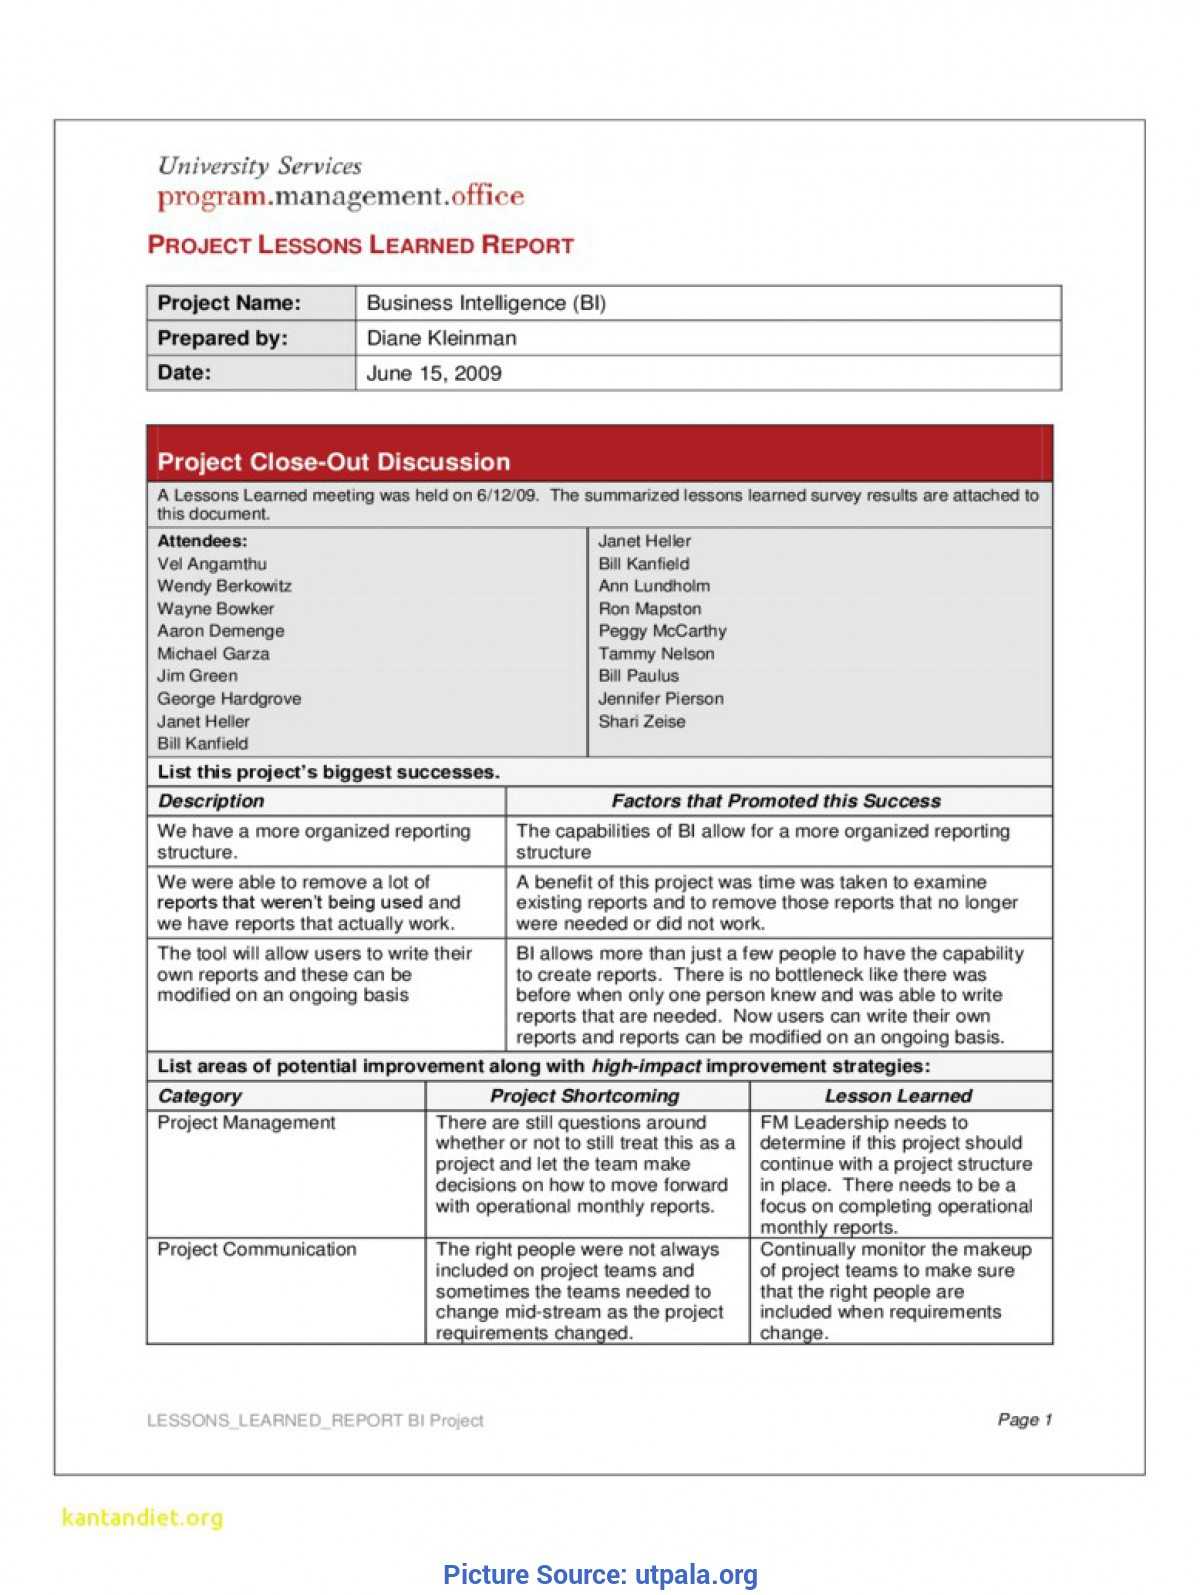 Complex Lessons Learned Template Download New Prince2 With Prince2 Lessons Learned Report Template